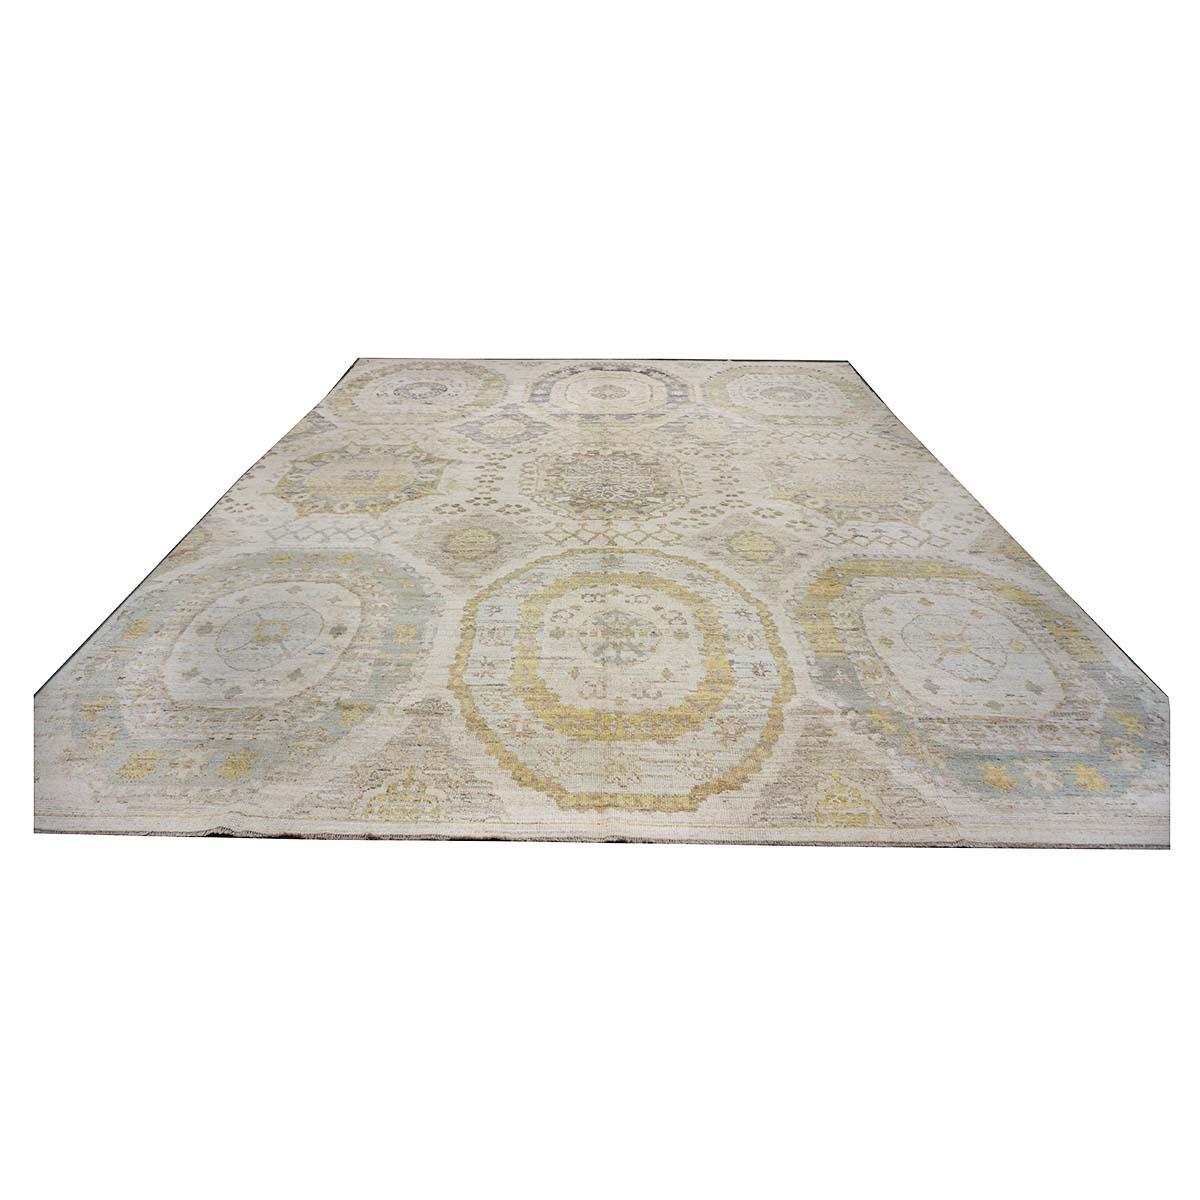 21st Century Turkish Oushak 13x15 Ivory, Olive Green, & Slate Blue Handmade Rug In Excellent Condition For Sale In Houston, TX